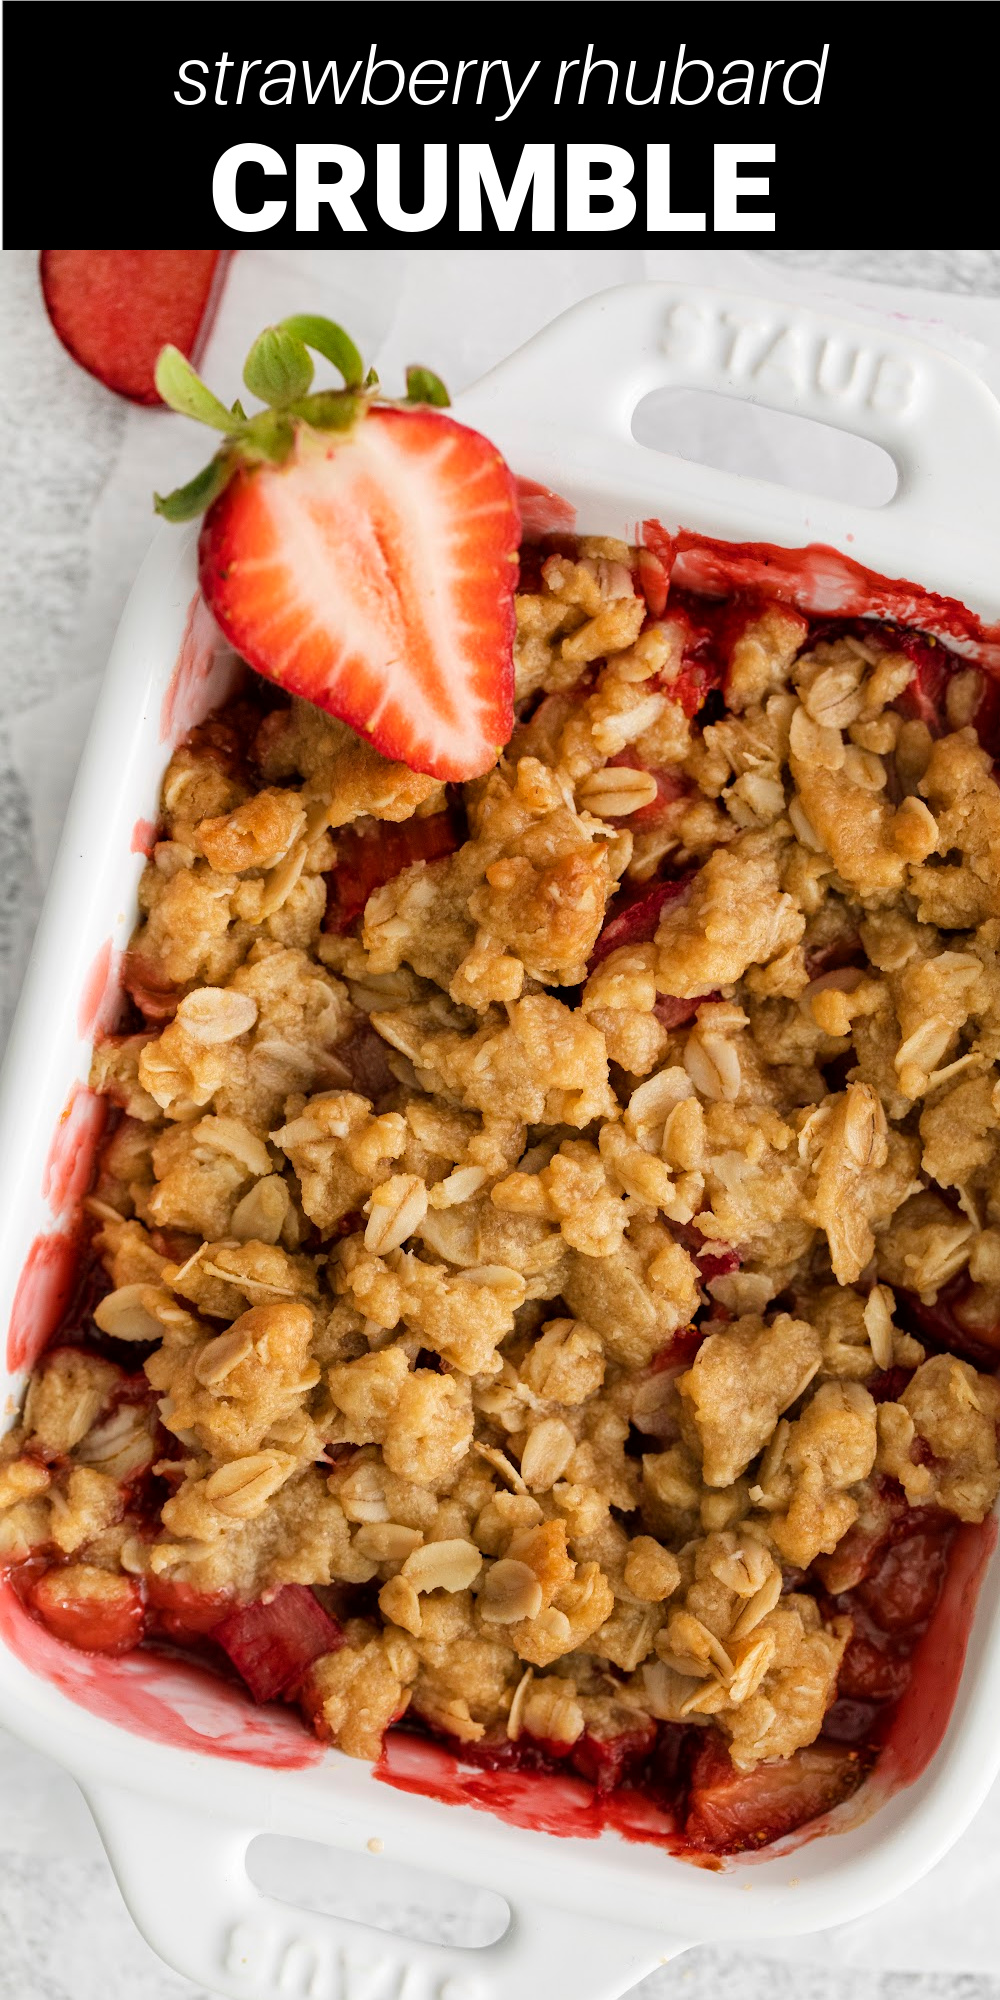 This individual strawberry rhubarb crisp is a delicious dessert that’s perfect for the spring and summer months. Fresh ripe strawberries and a hint of lemon pair perfectly with the citrusy tartness of the rhubarb to form a warm and fruity compote that’s the perfect balance of sweet and tart.